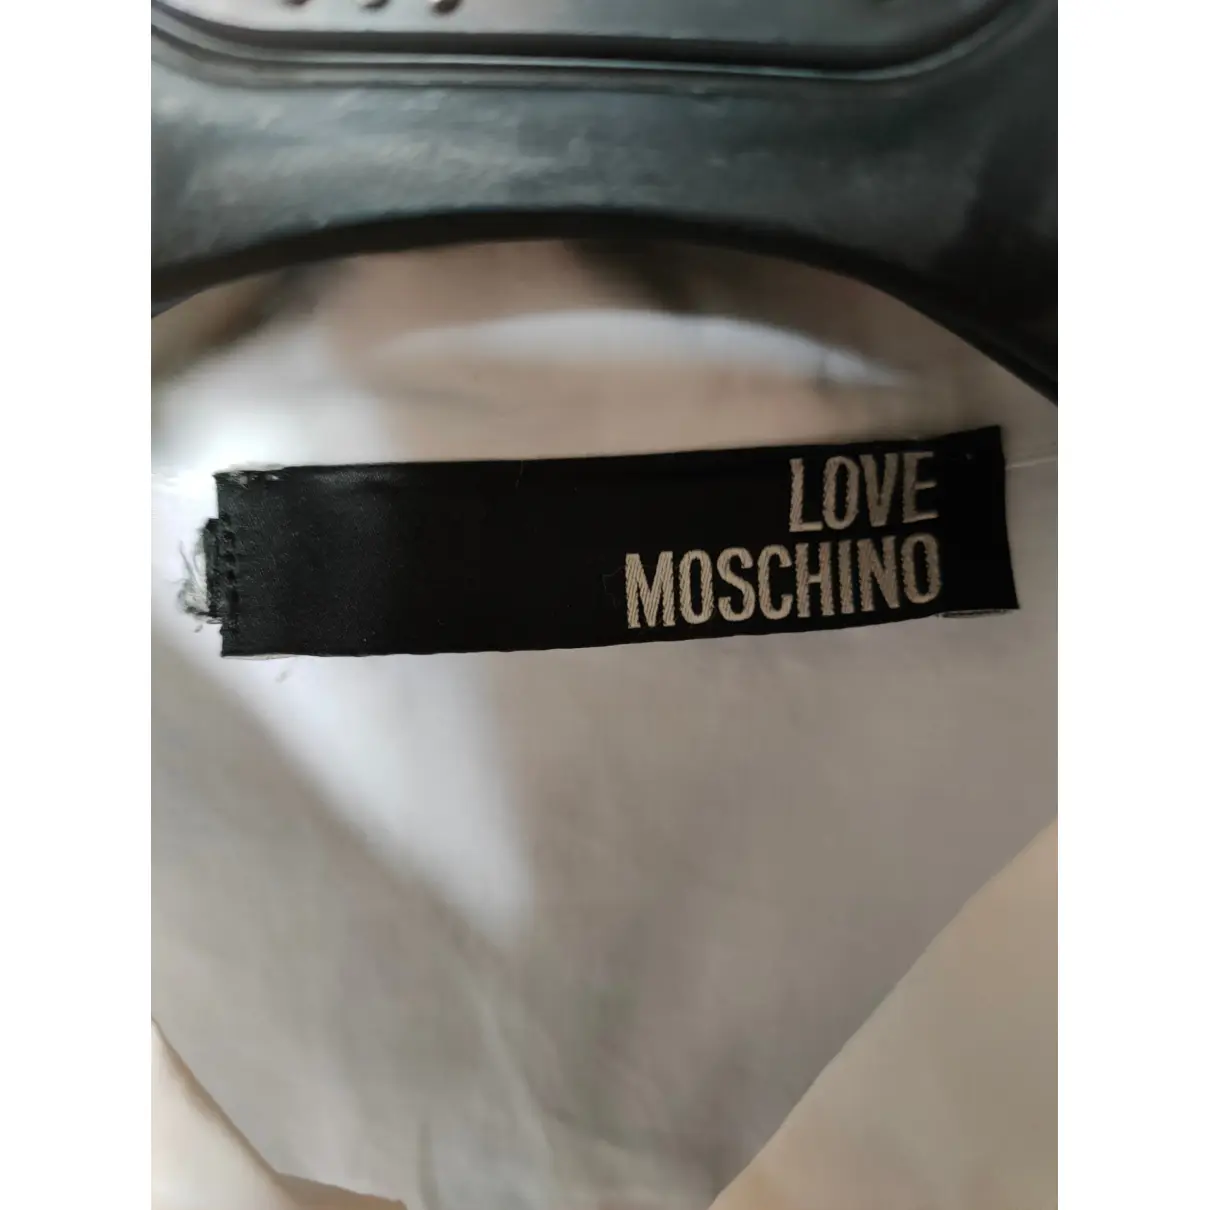 Buy Moschino Love Blouse online